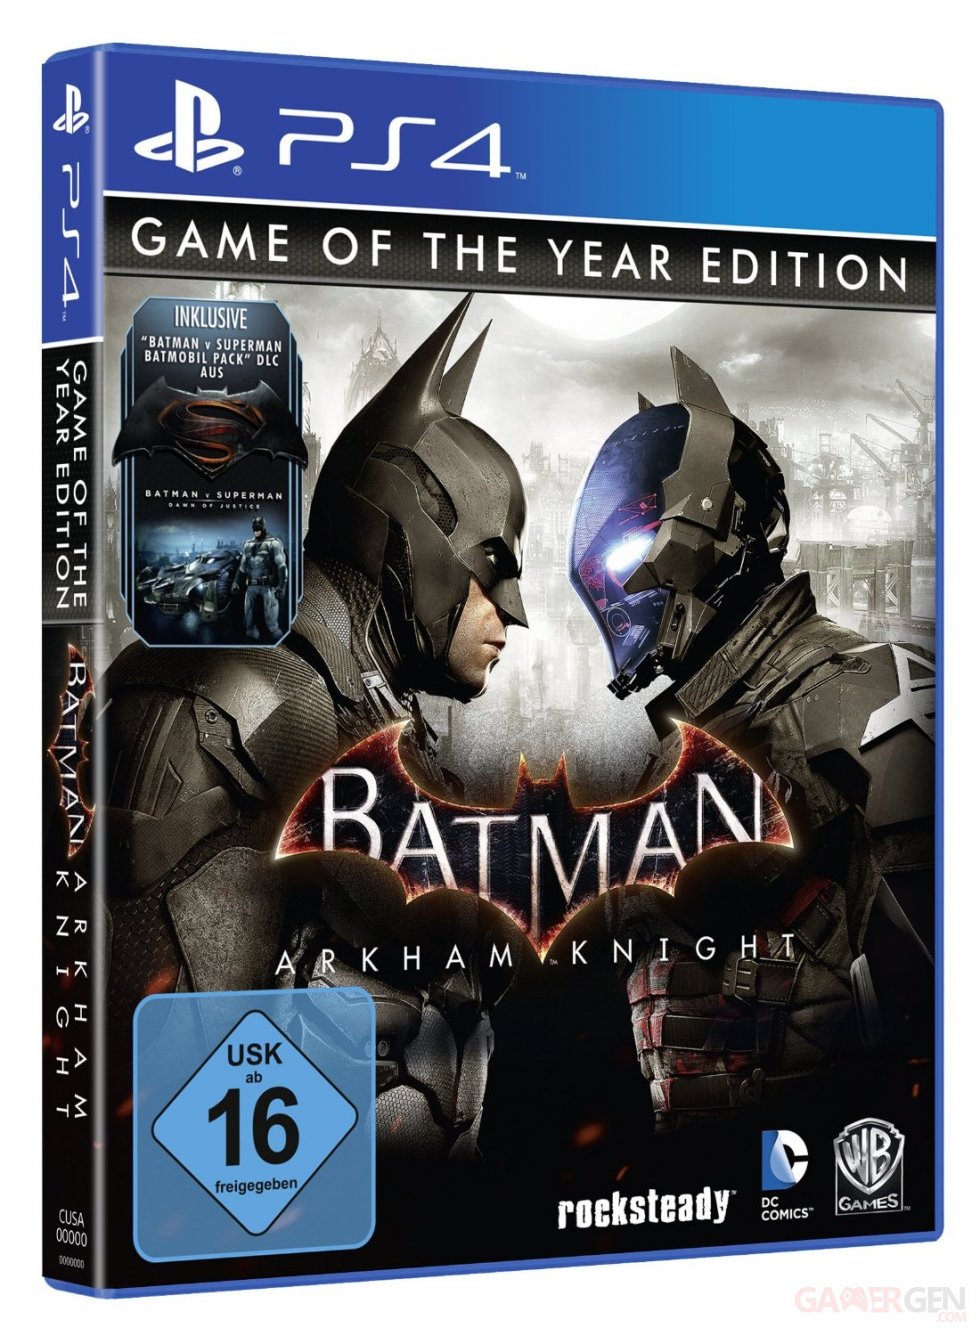 Batman Arkham Knight Jaquette Cover Game of the Year Edition GOTY PS4